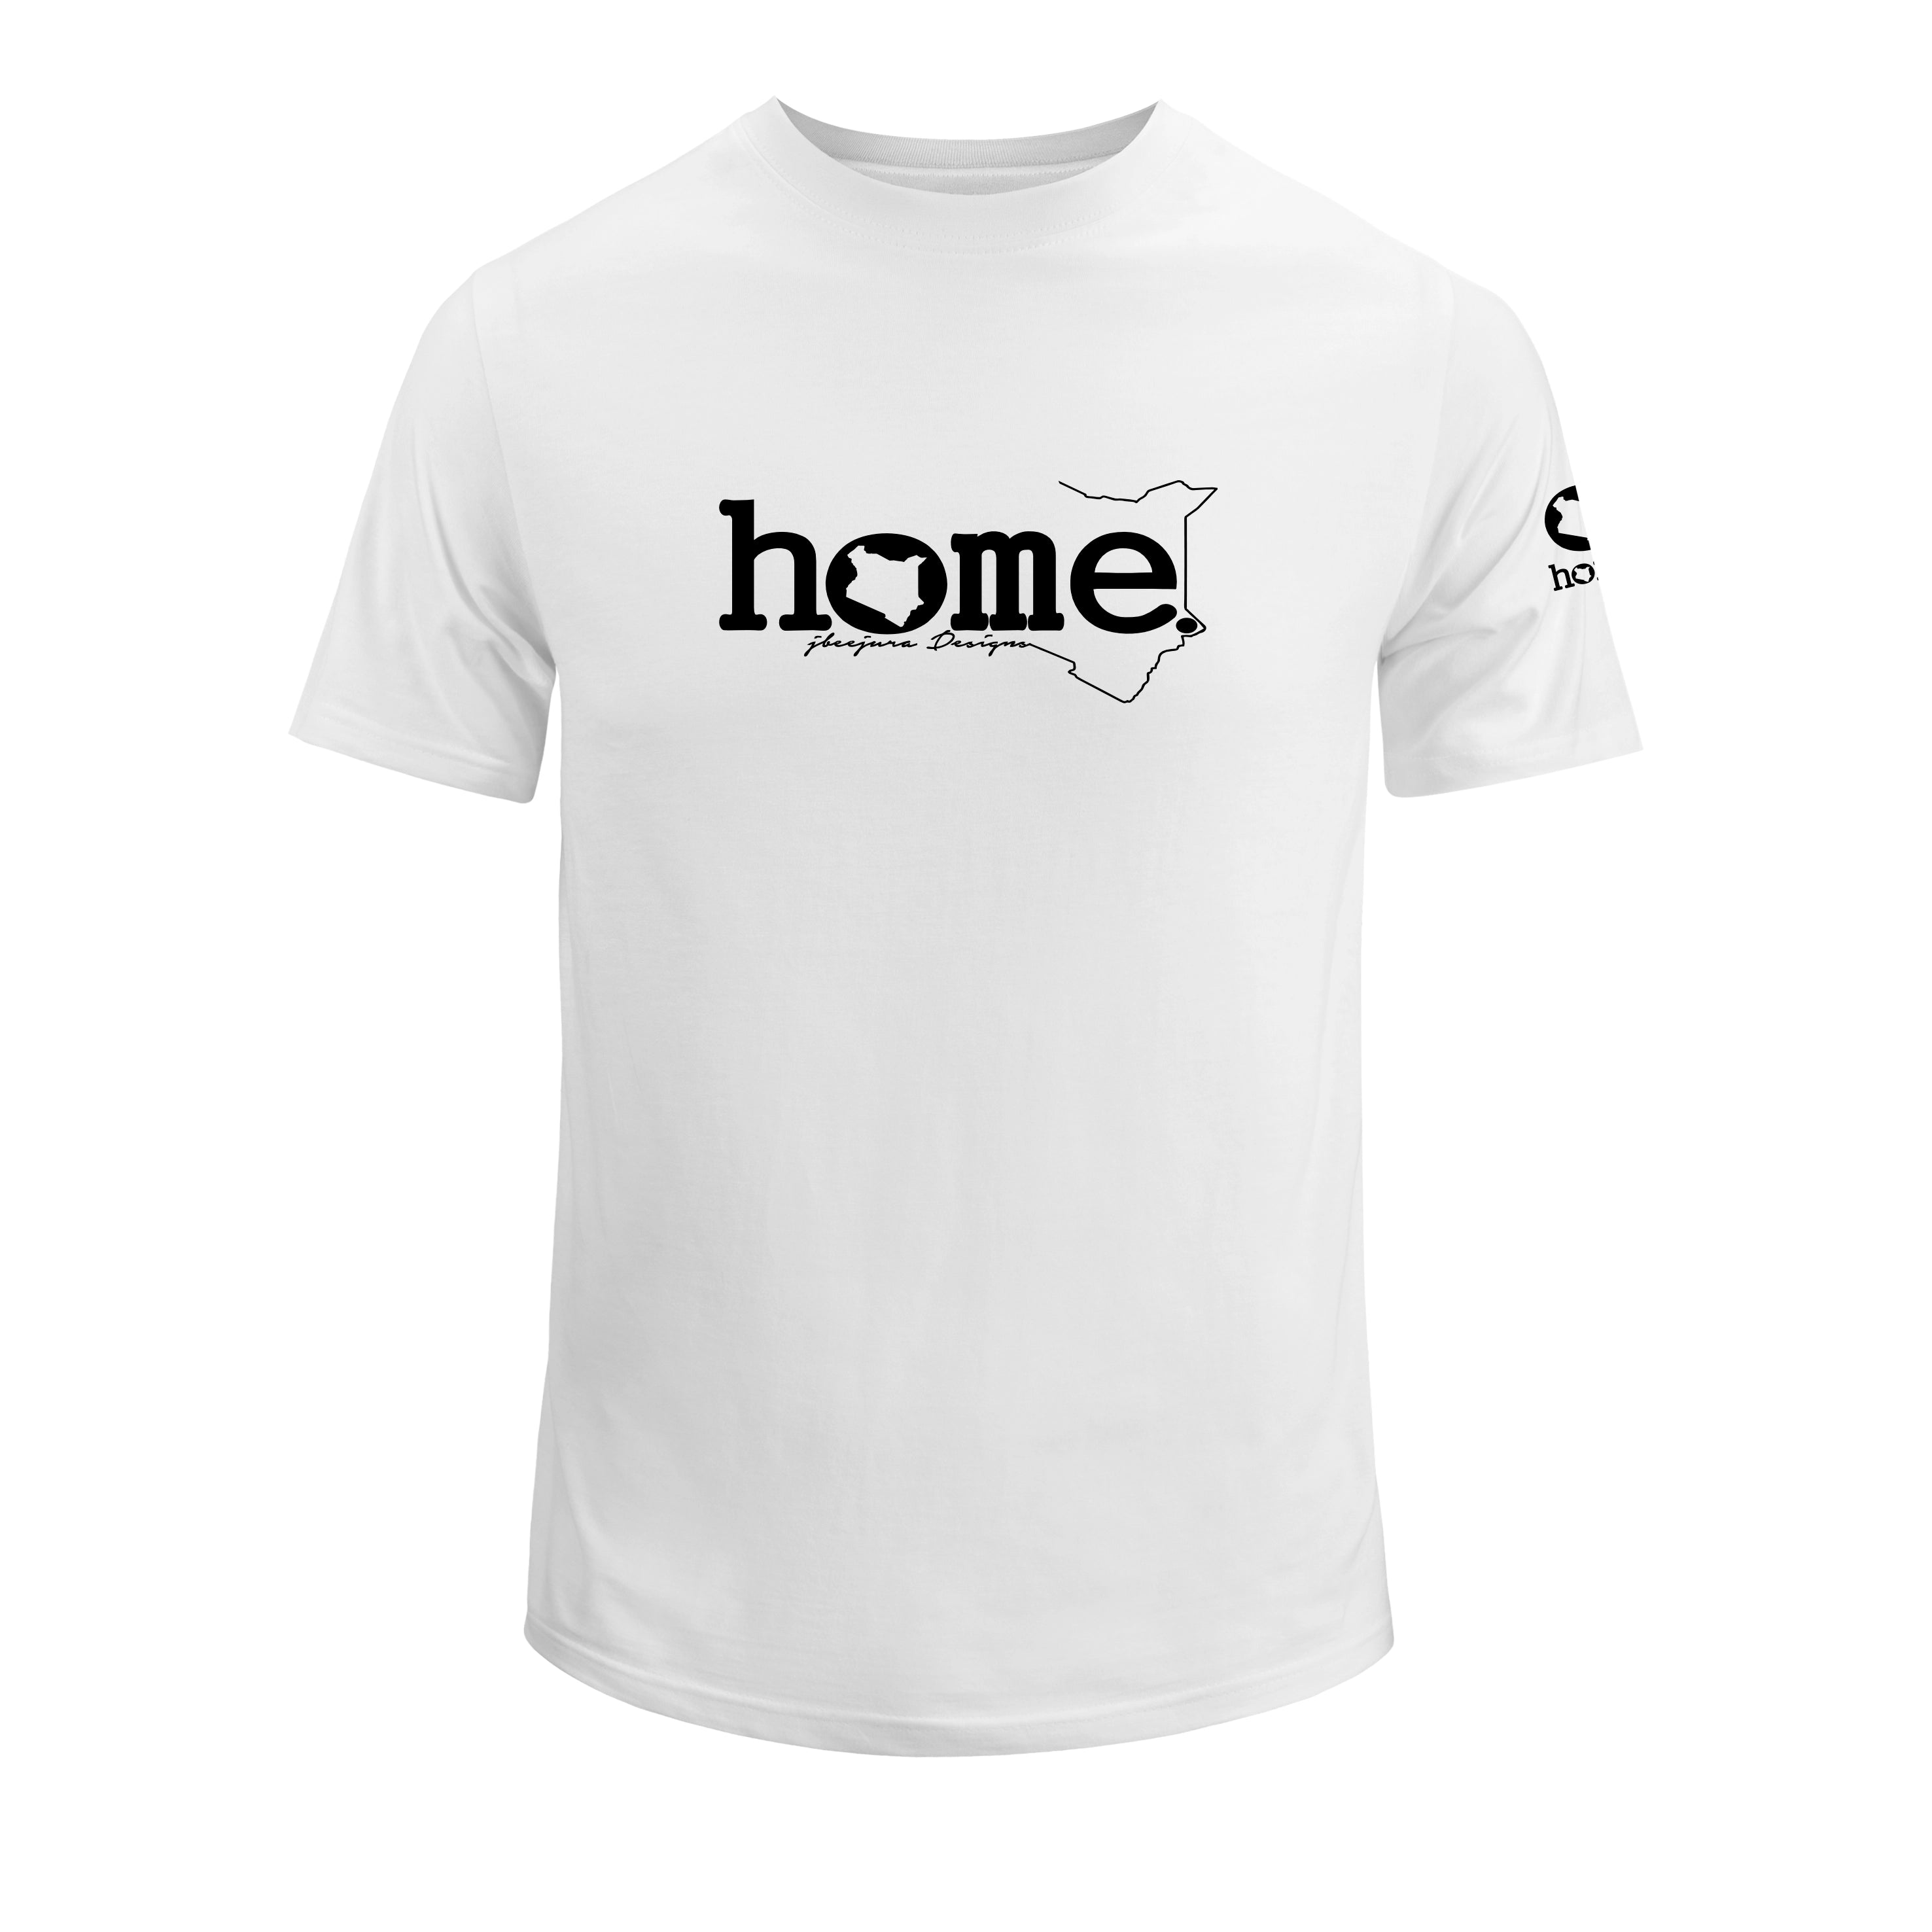 home_254 KIDS SHORT-SLEEVED WHITE T-SHIRT WITH A BLACK CLASSIC WORDS PRINT – COTTON PLUS FABRIC